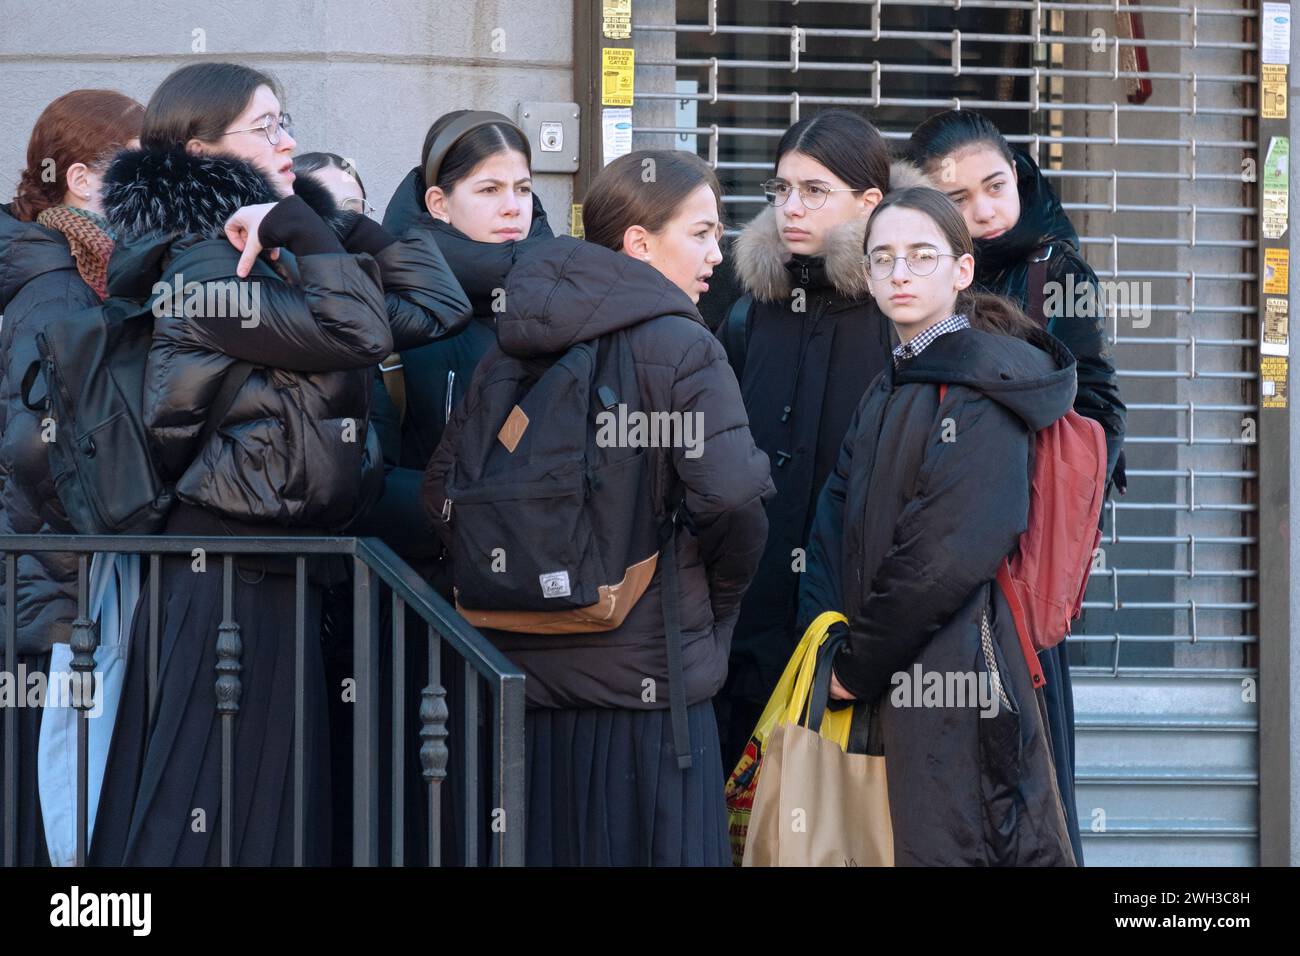 On a cold winter day a group of orthodox Hasidic gorls wait for a bus to takle them to school. On Lee Avenue in Williamsburg, Brooklyn, New Yrok. Stock Photo